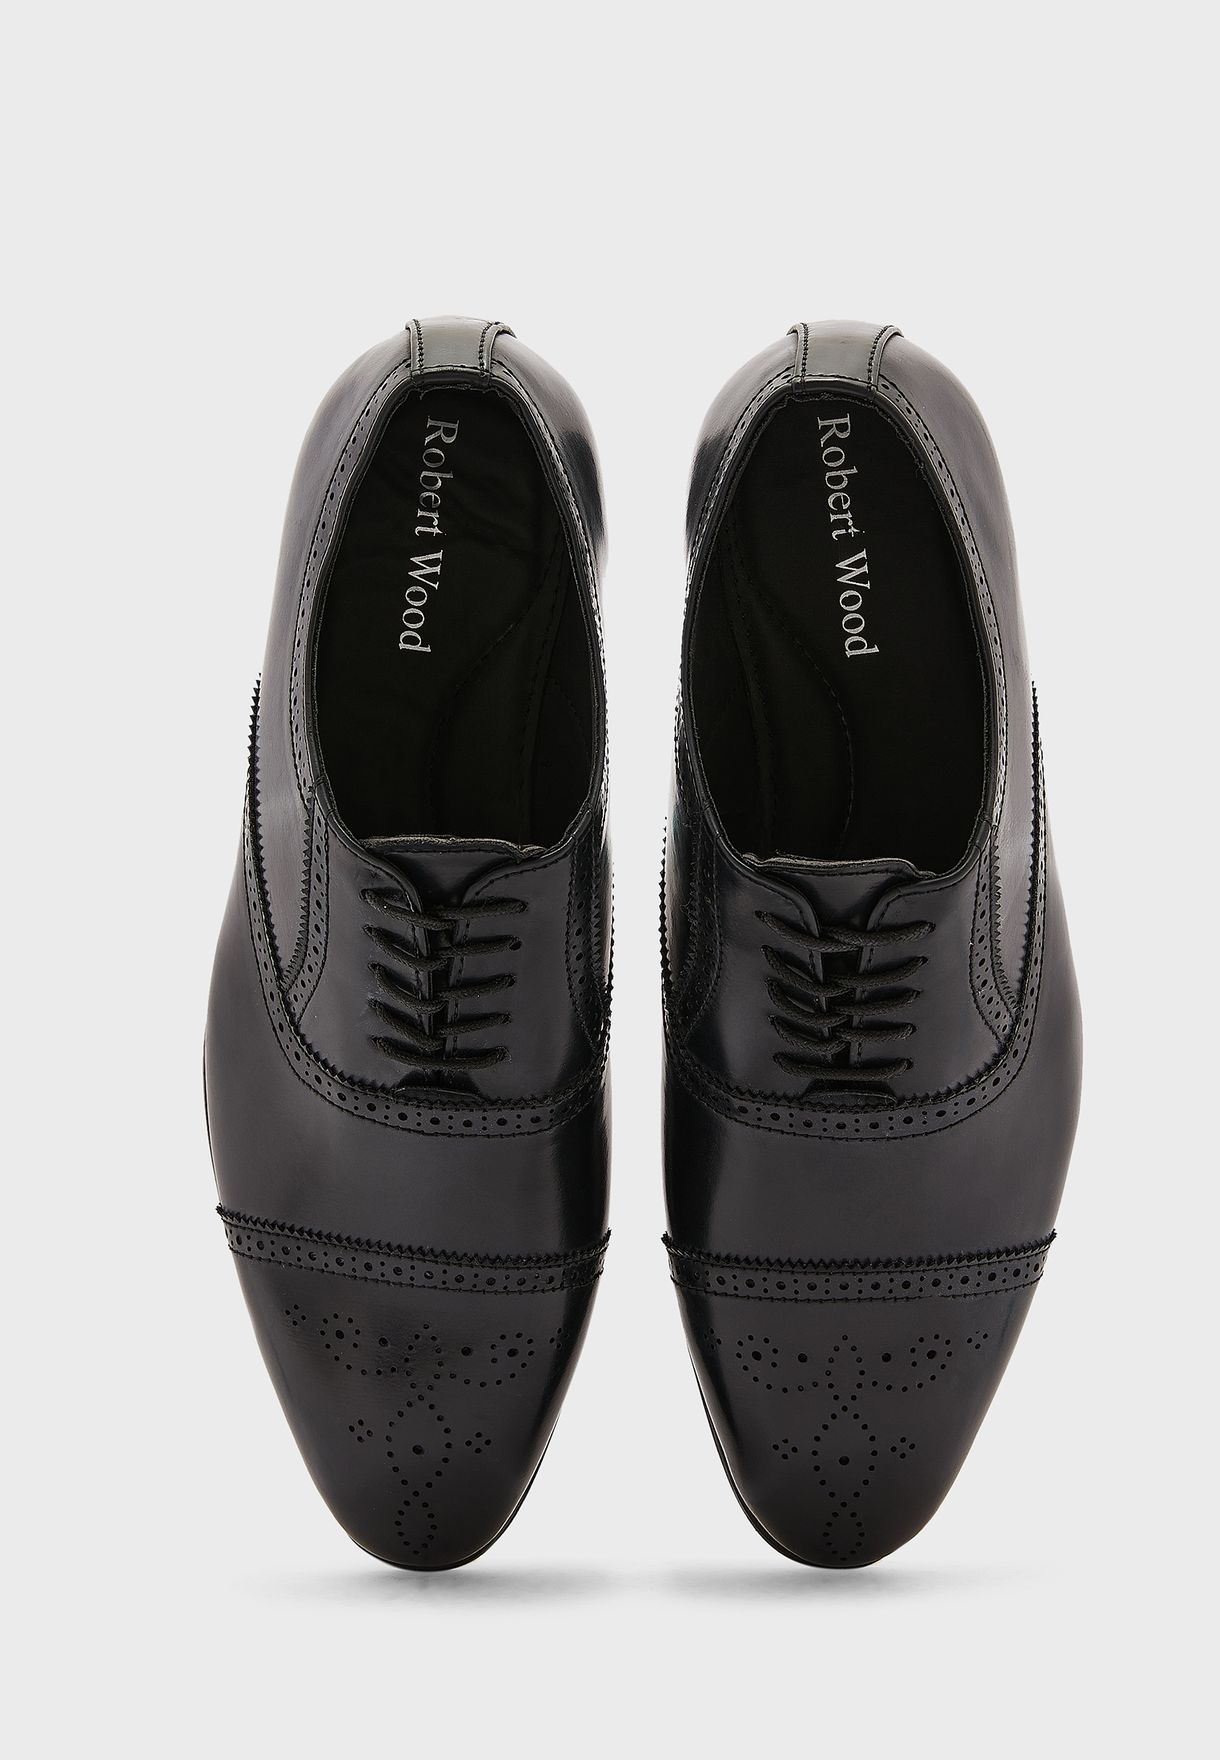 Faux Leather Brogue Oxford Formal Lace Ups